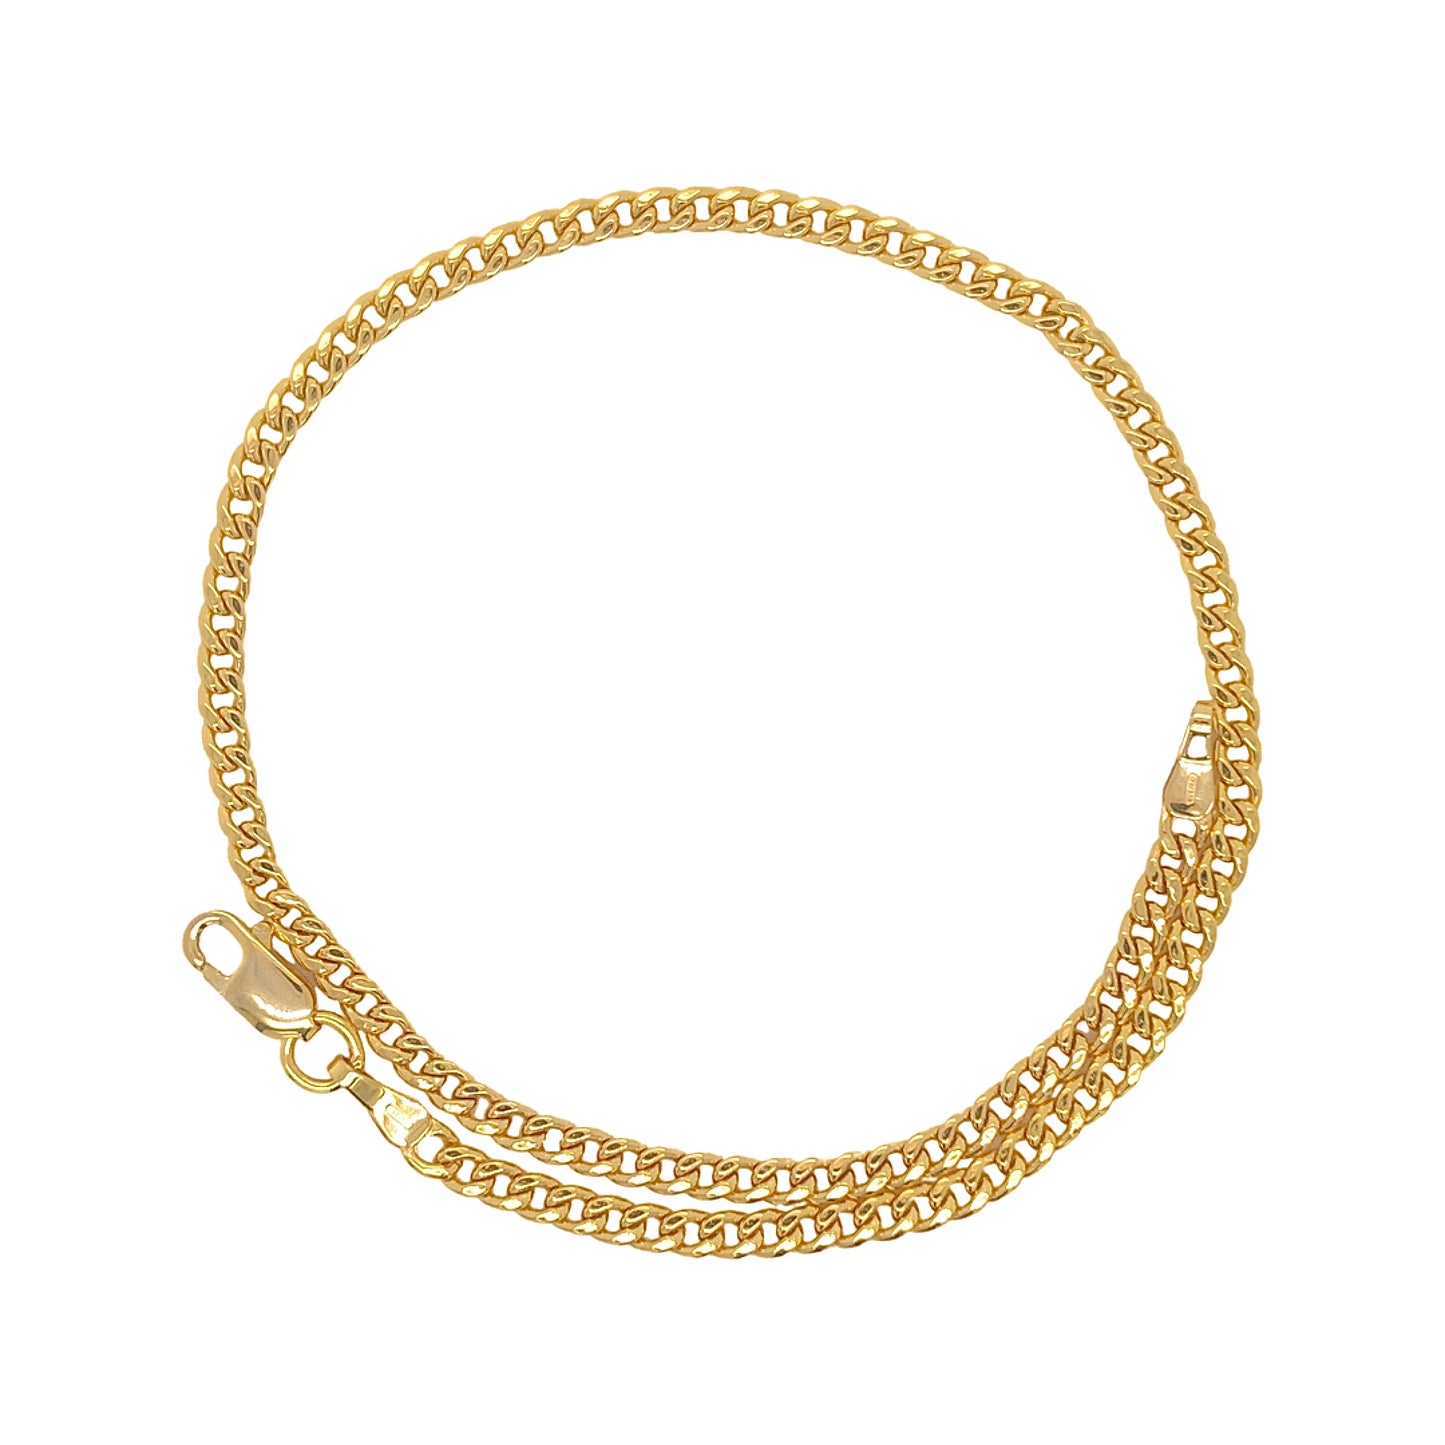 10k yellow gold miami cuban anklet - women's jewelry 